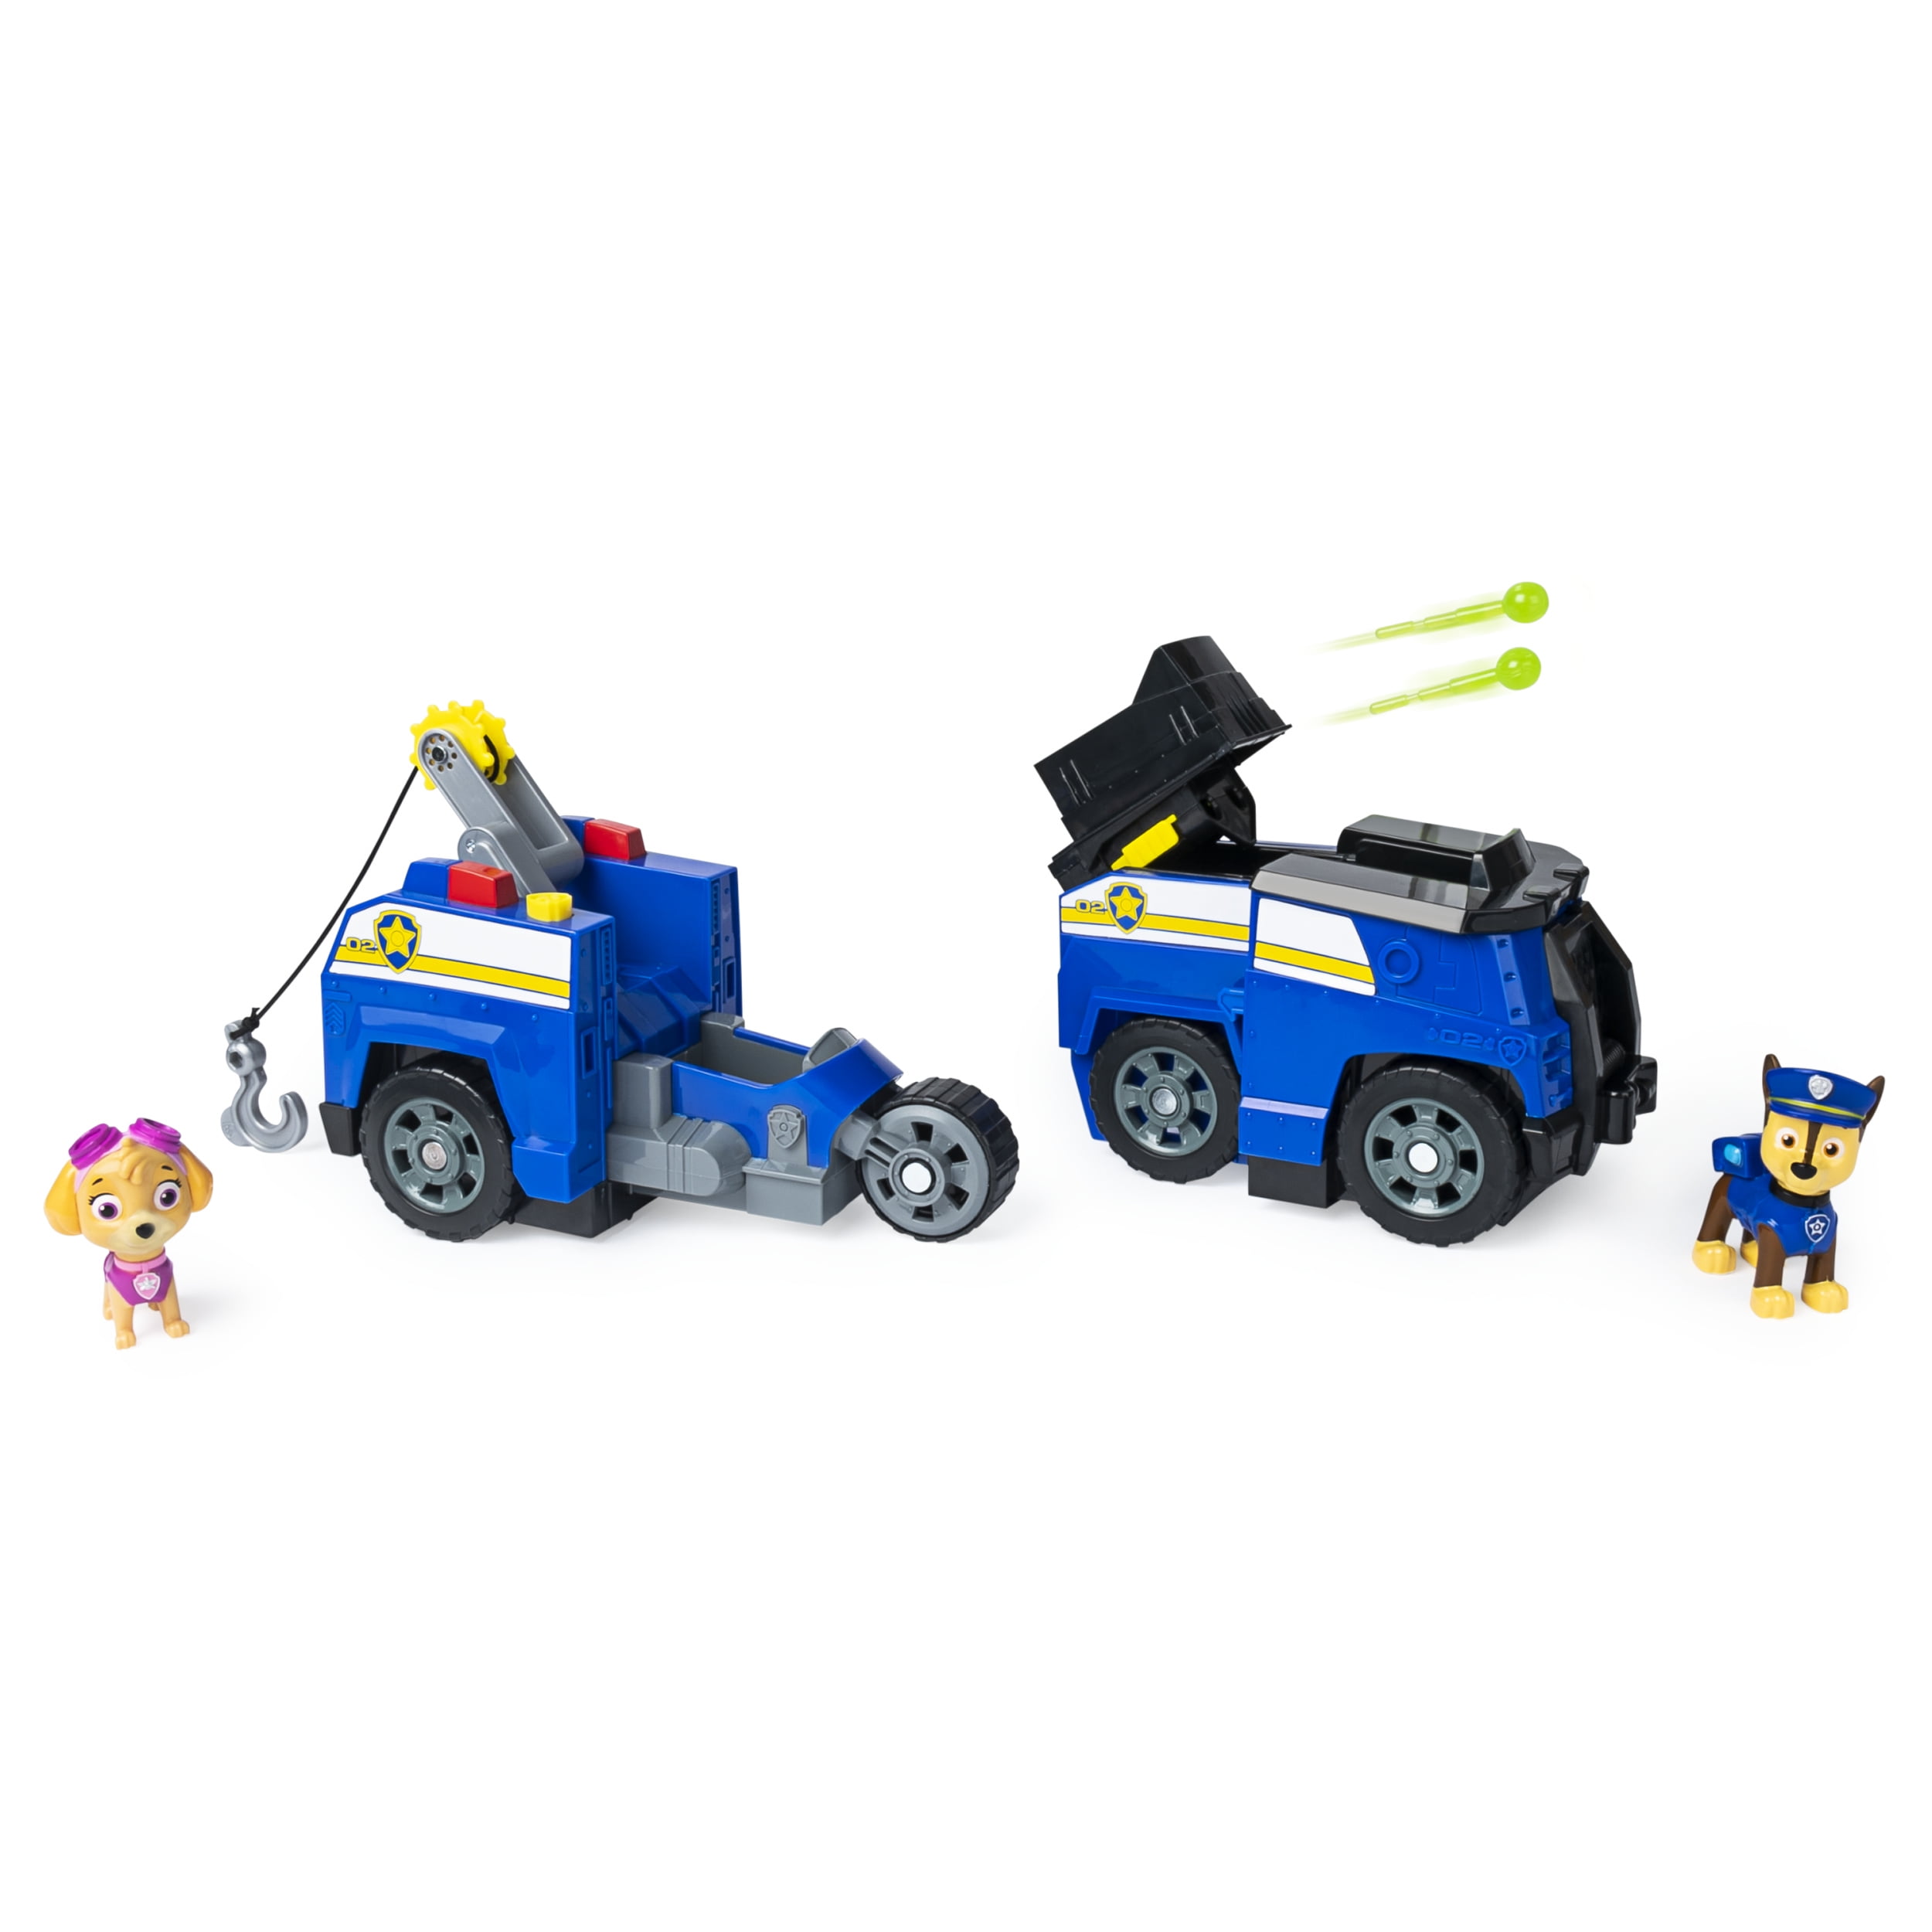 Paw Patrol 6052626 Chase's Ride 'n' Rescue, Transforming 2-in-1 